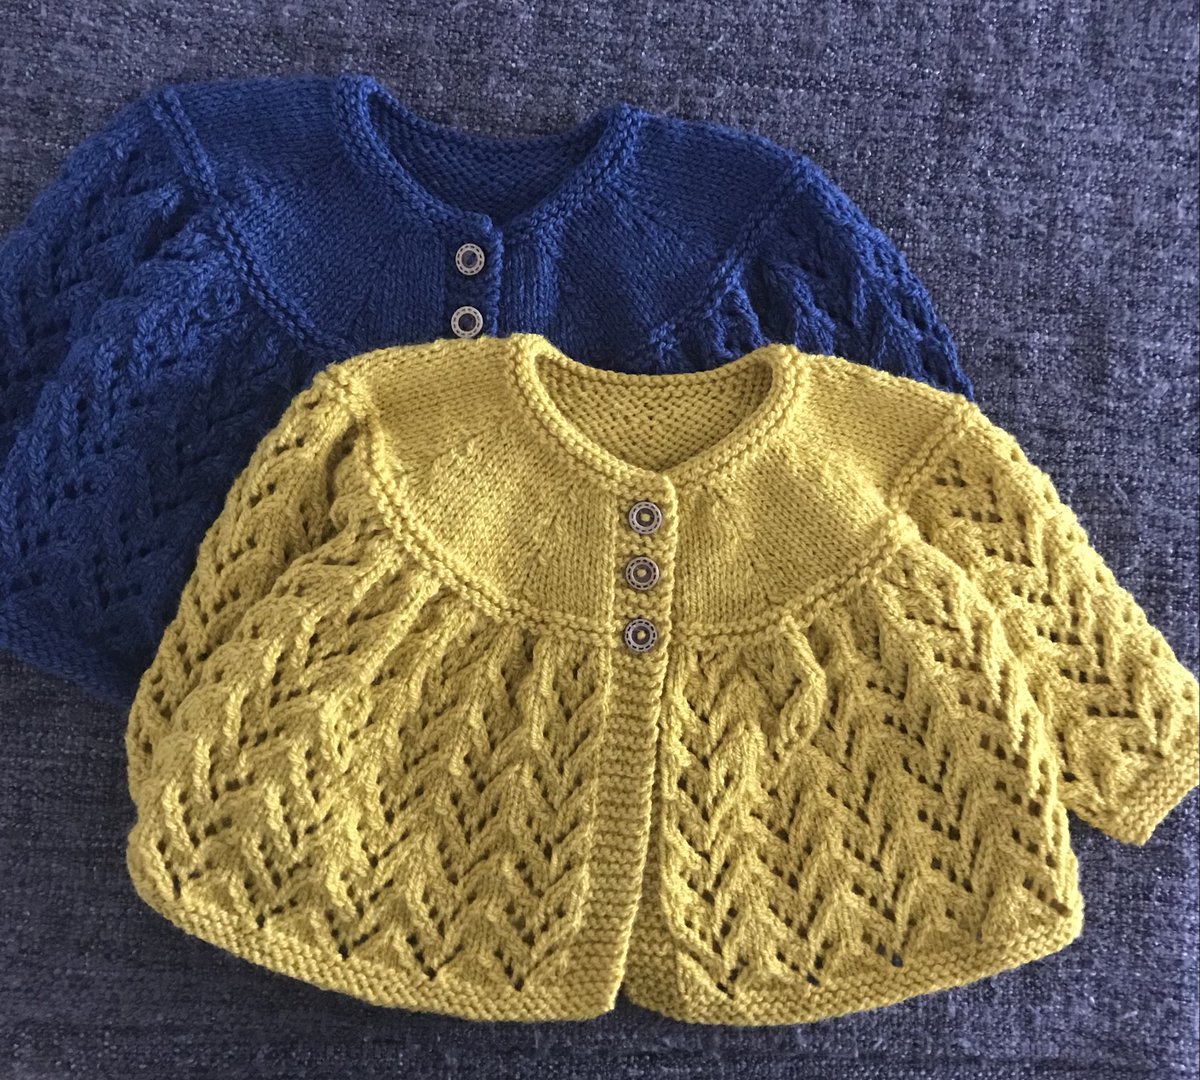 #MHHSBD 𝐕𝐢𝐧𝐭𝐚𝐠𝐞 𝐠𝐥𝐚𝐦𝐨𝐮𝐫! This cardigan looks great in any colour. Perfect gift for a newborn or a toddler. Can be made in other colours, just get in touch for details. Link in bio. #CraftBizParty